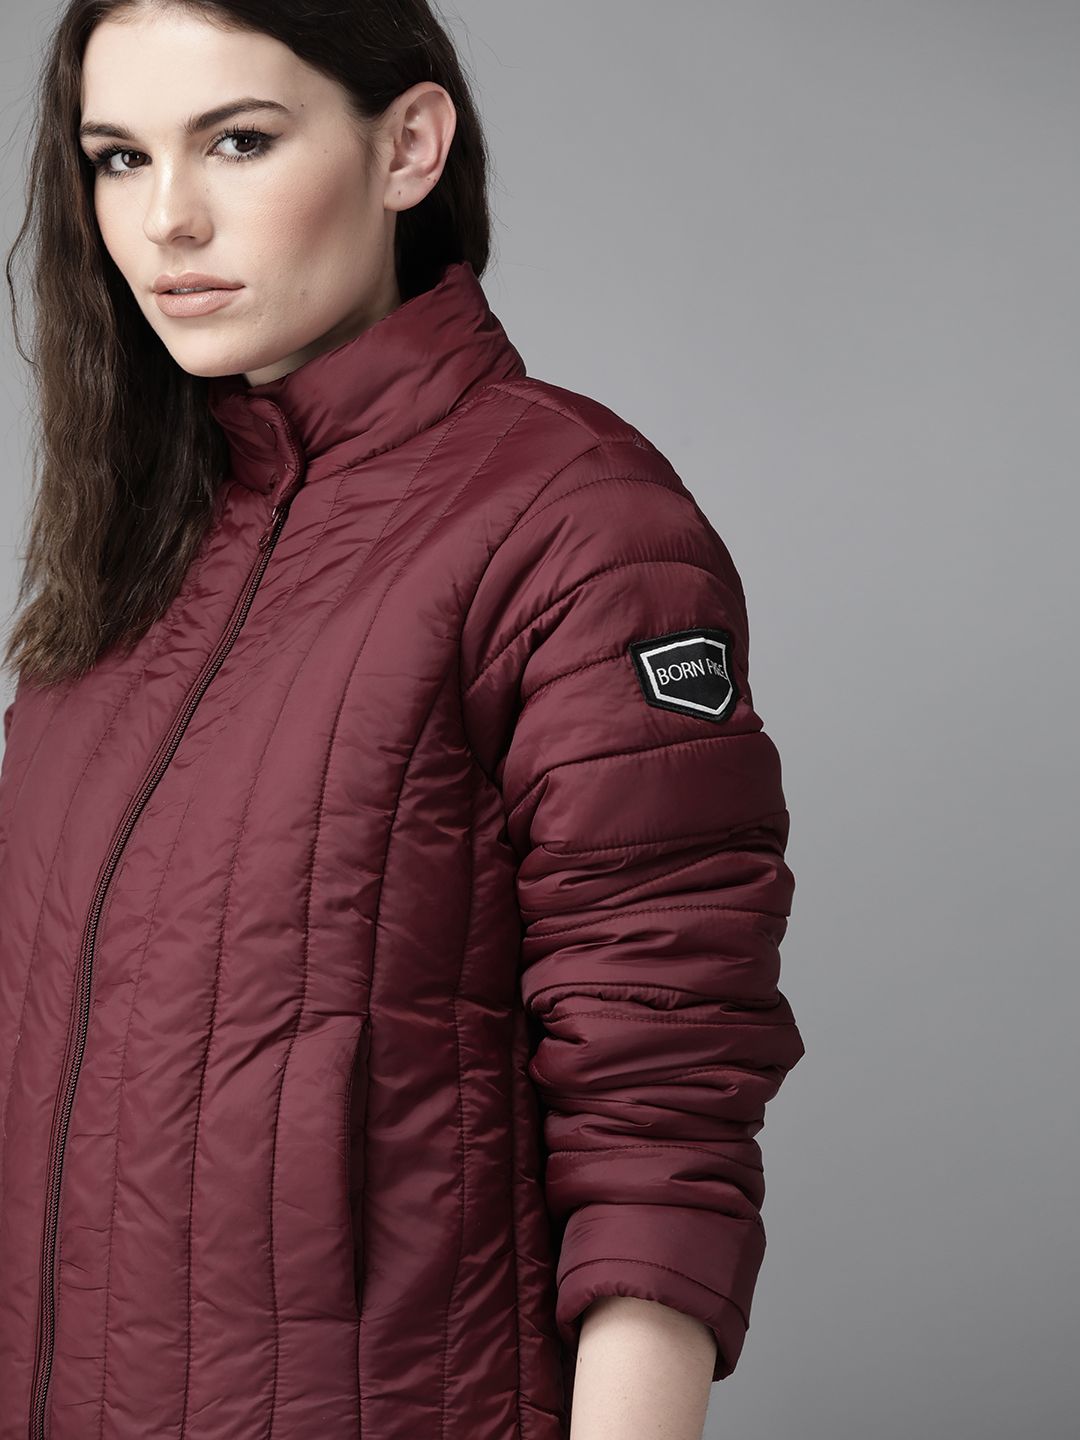 Roadster Women Burgundy Solid Puffer Jacket with Applique Detail Price in India